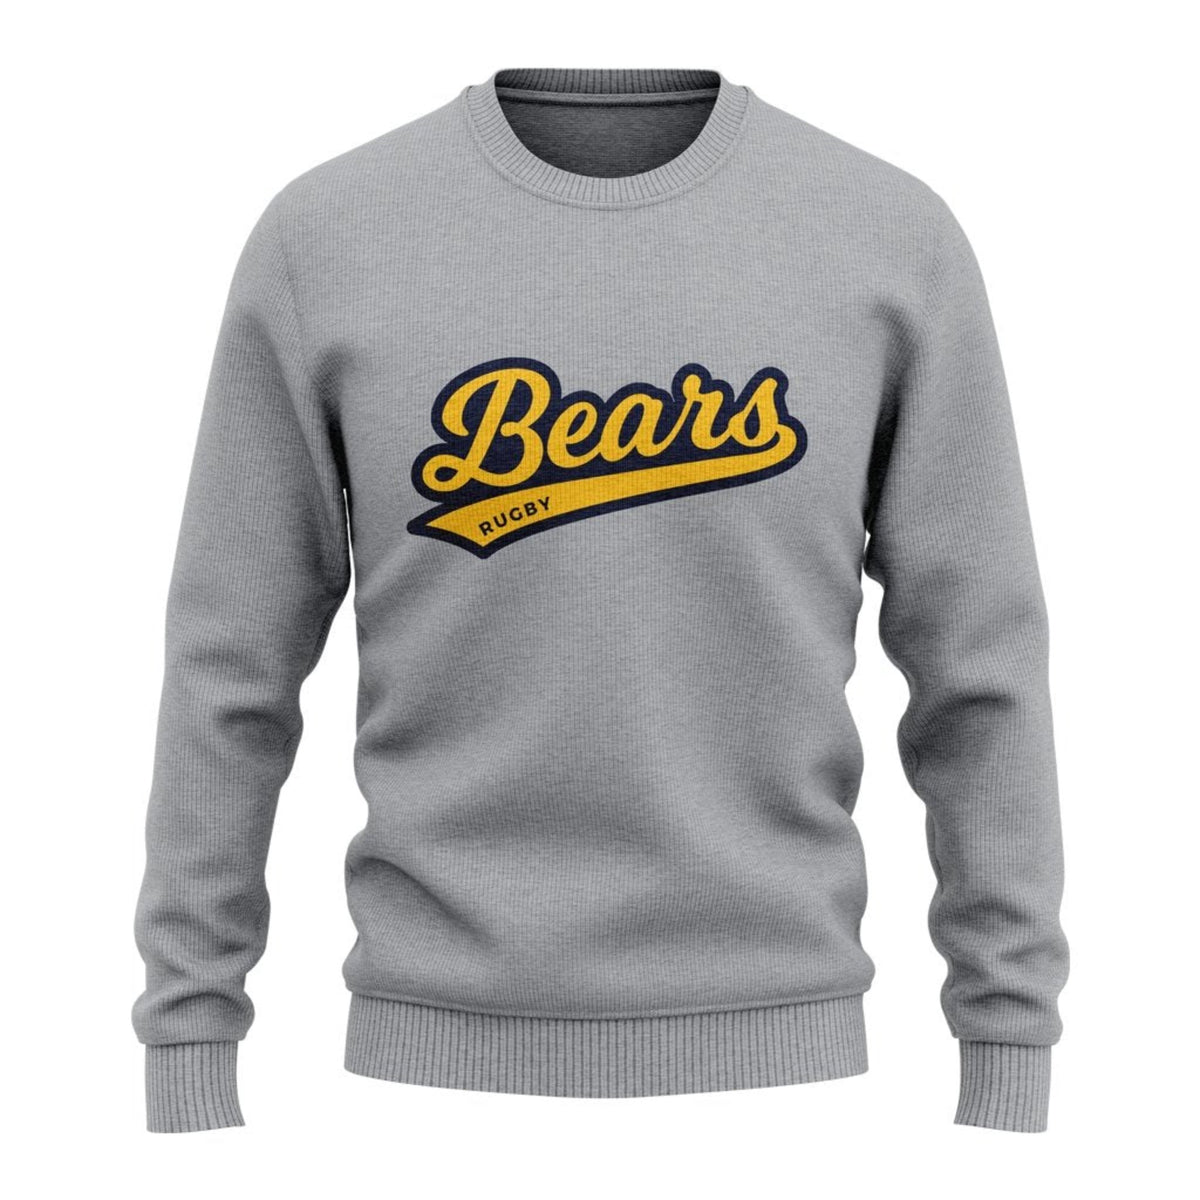 BC Rugby 2021 &quot;Bears&quot; Crew Neck Sweater - Adult Unisex - www.therugbyshop.com www.therugbyshop.com UNISEX / GREY / S XIX Brands HOODIES BC Rugby 2021 &quot;Bears&quot; Crew Neck Sweater - Adult Unisex